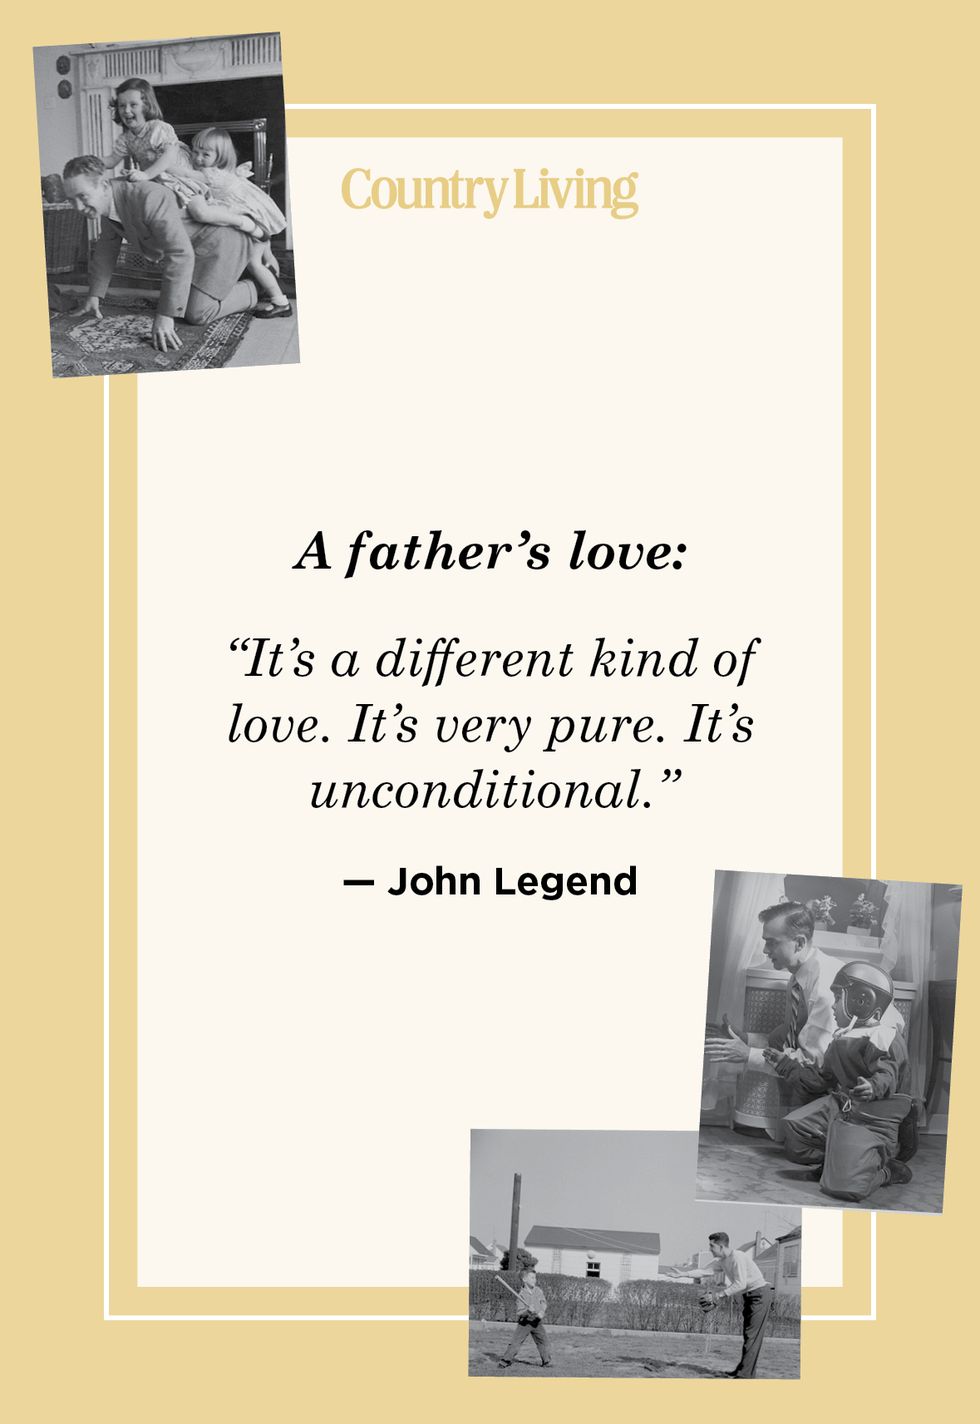 short father's love quote for father's day by singer john legend